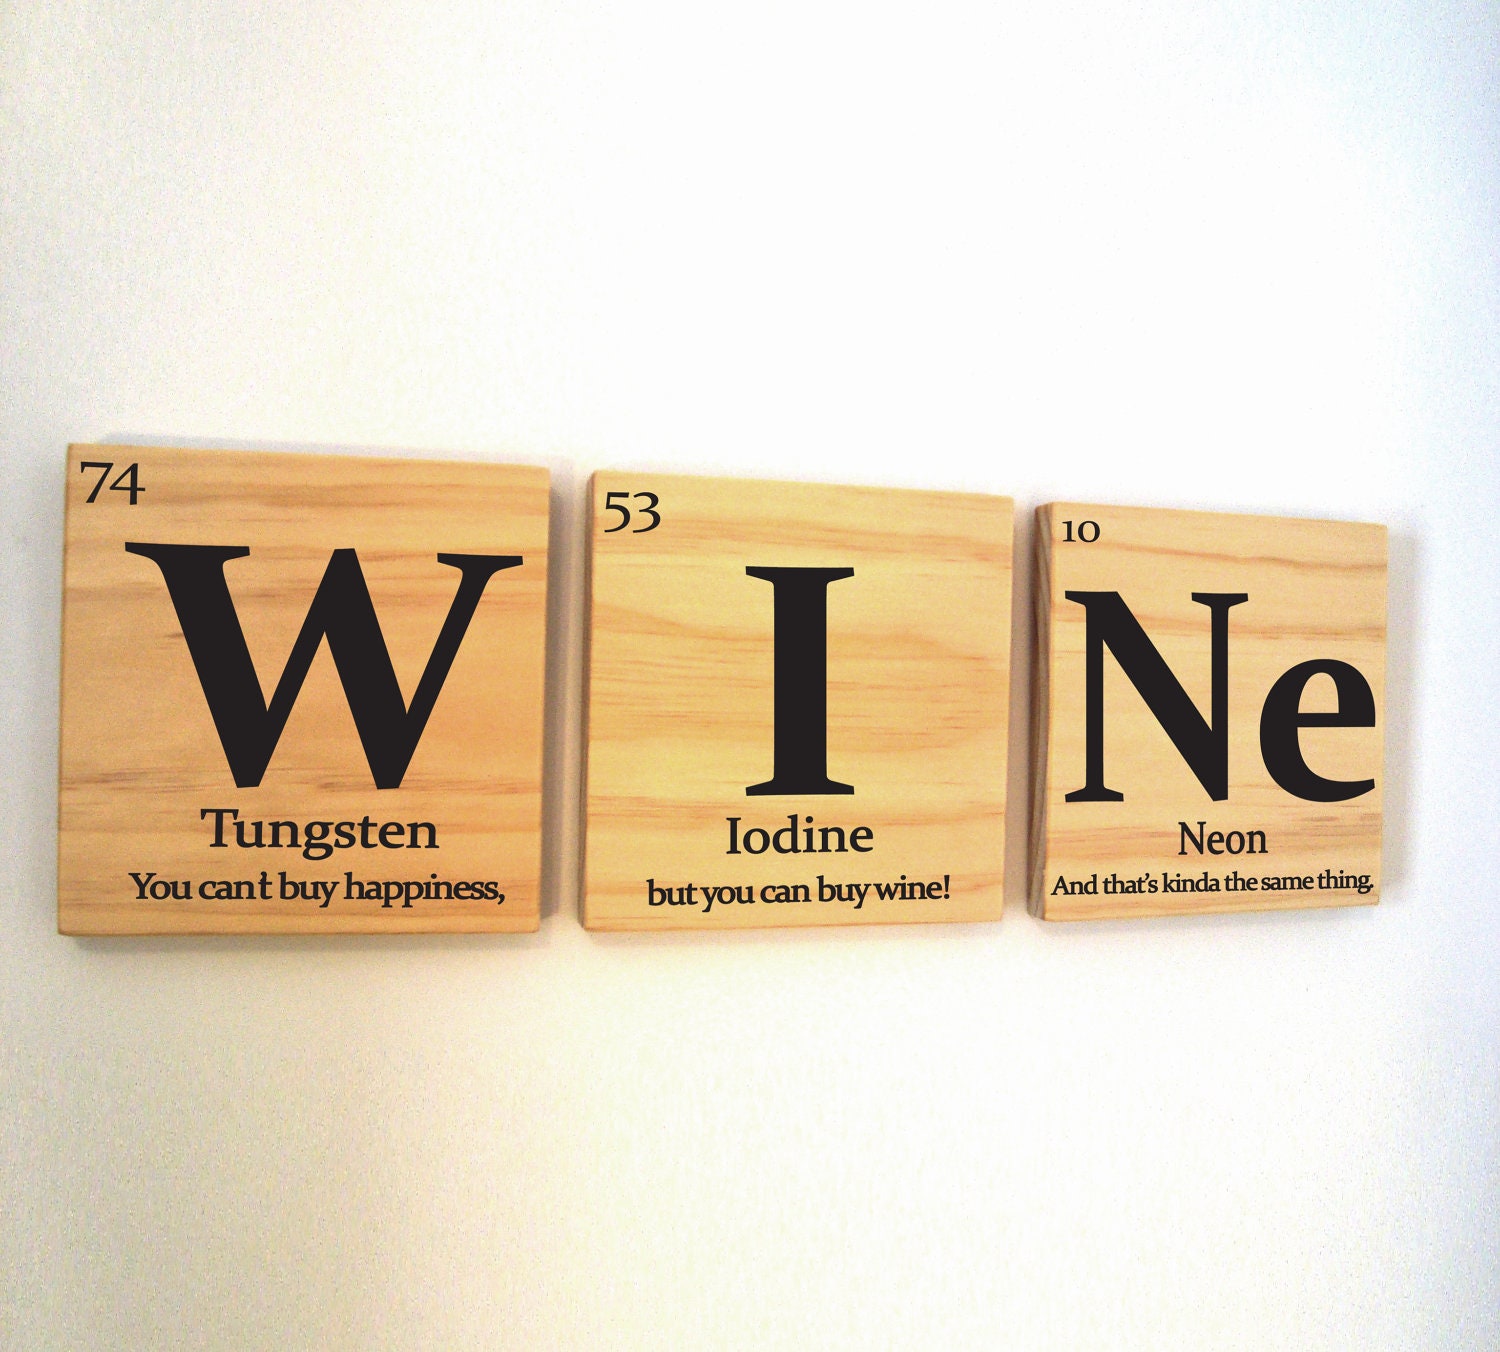 Periodic table of elements WINE wooden tile wall art with quote - 15tangerines